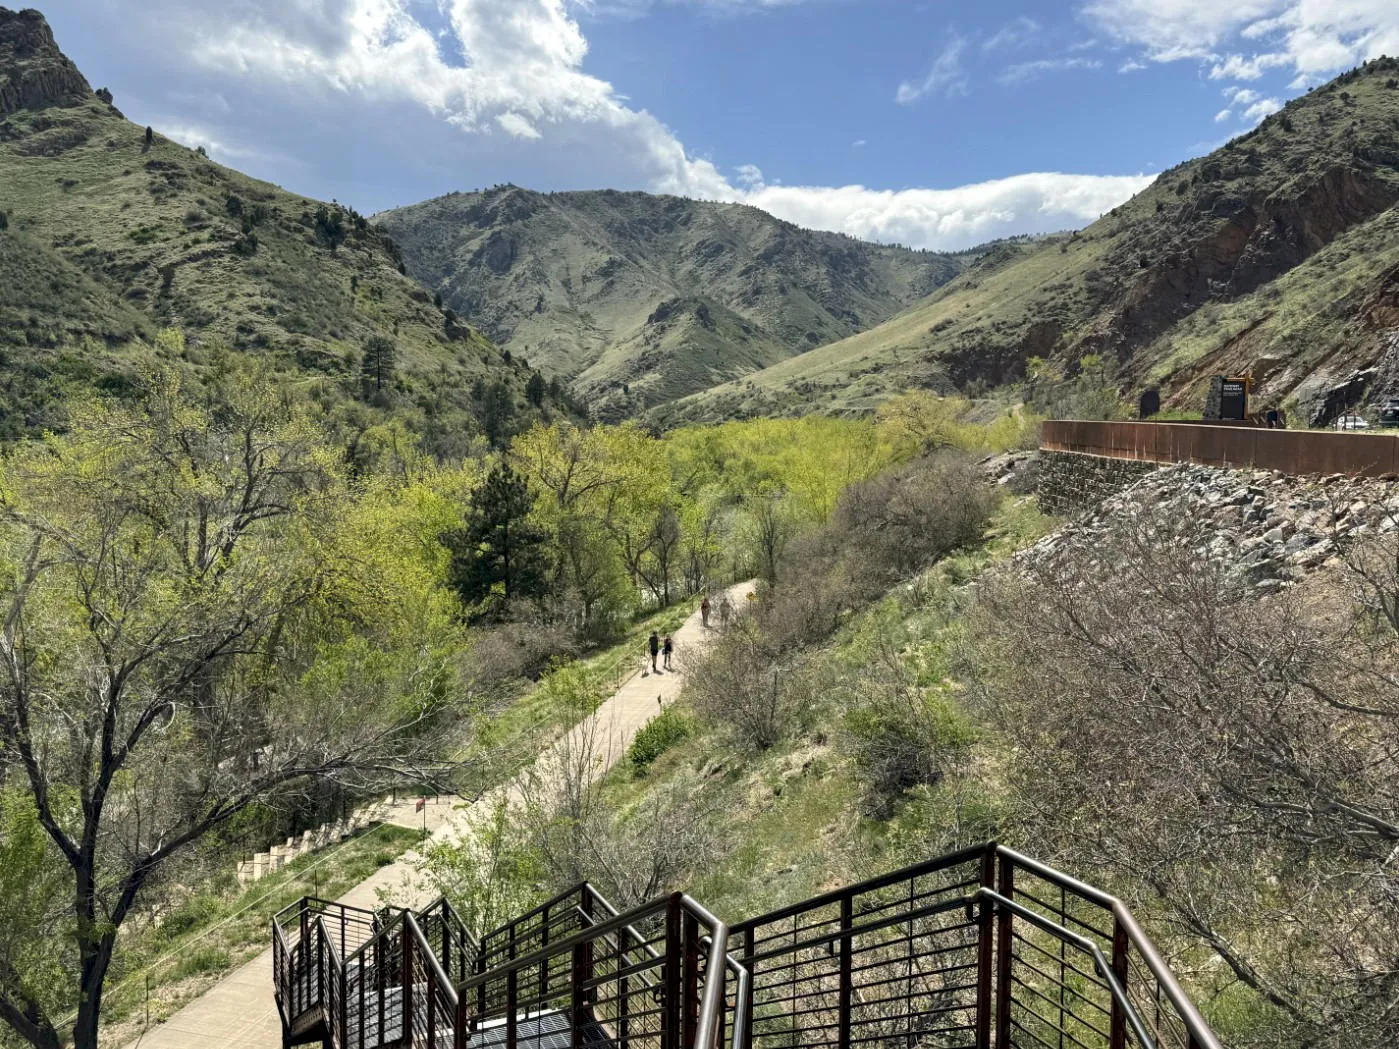 view down into a canyon with a concrete trail from the top of a long set of metal stairs. Viewer is above the treetops.